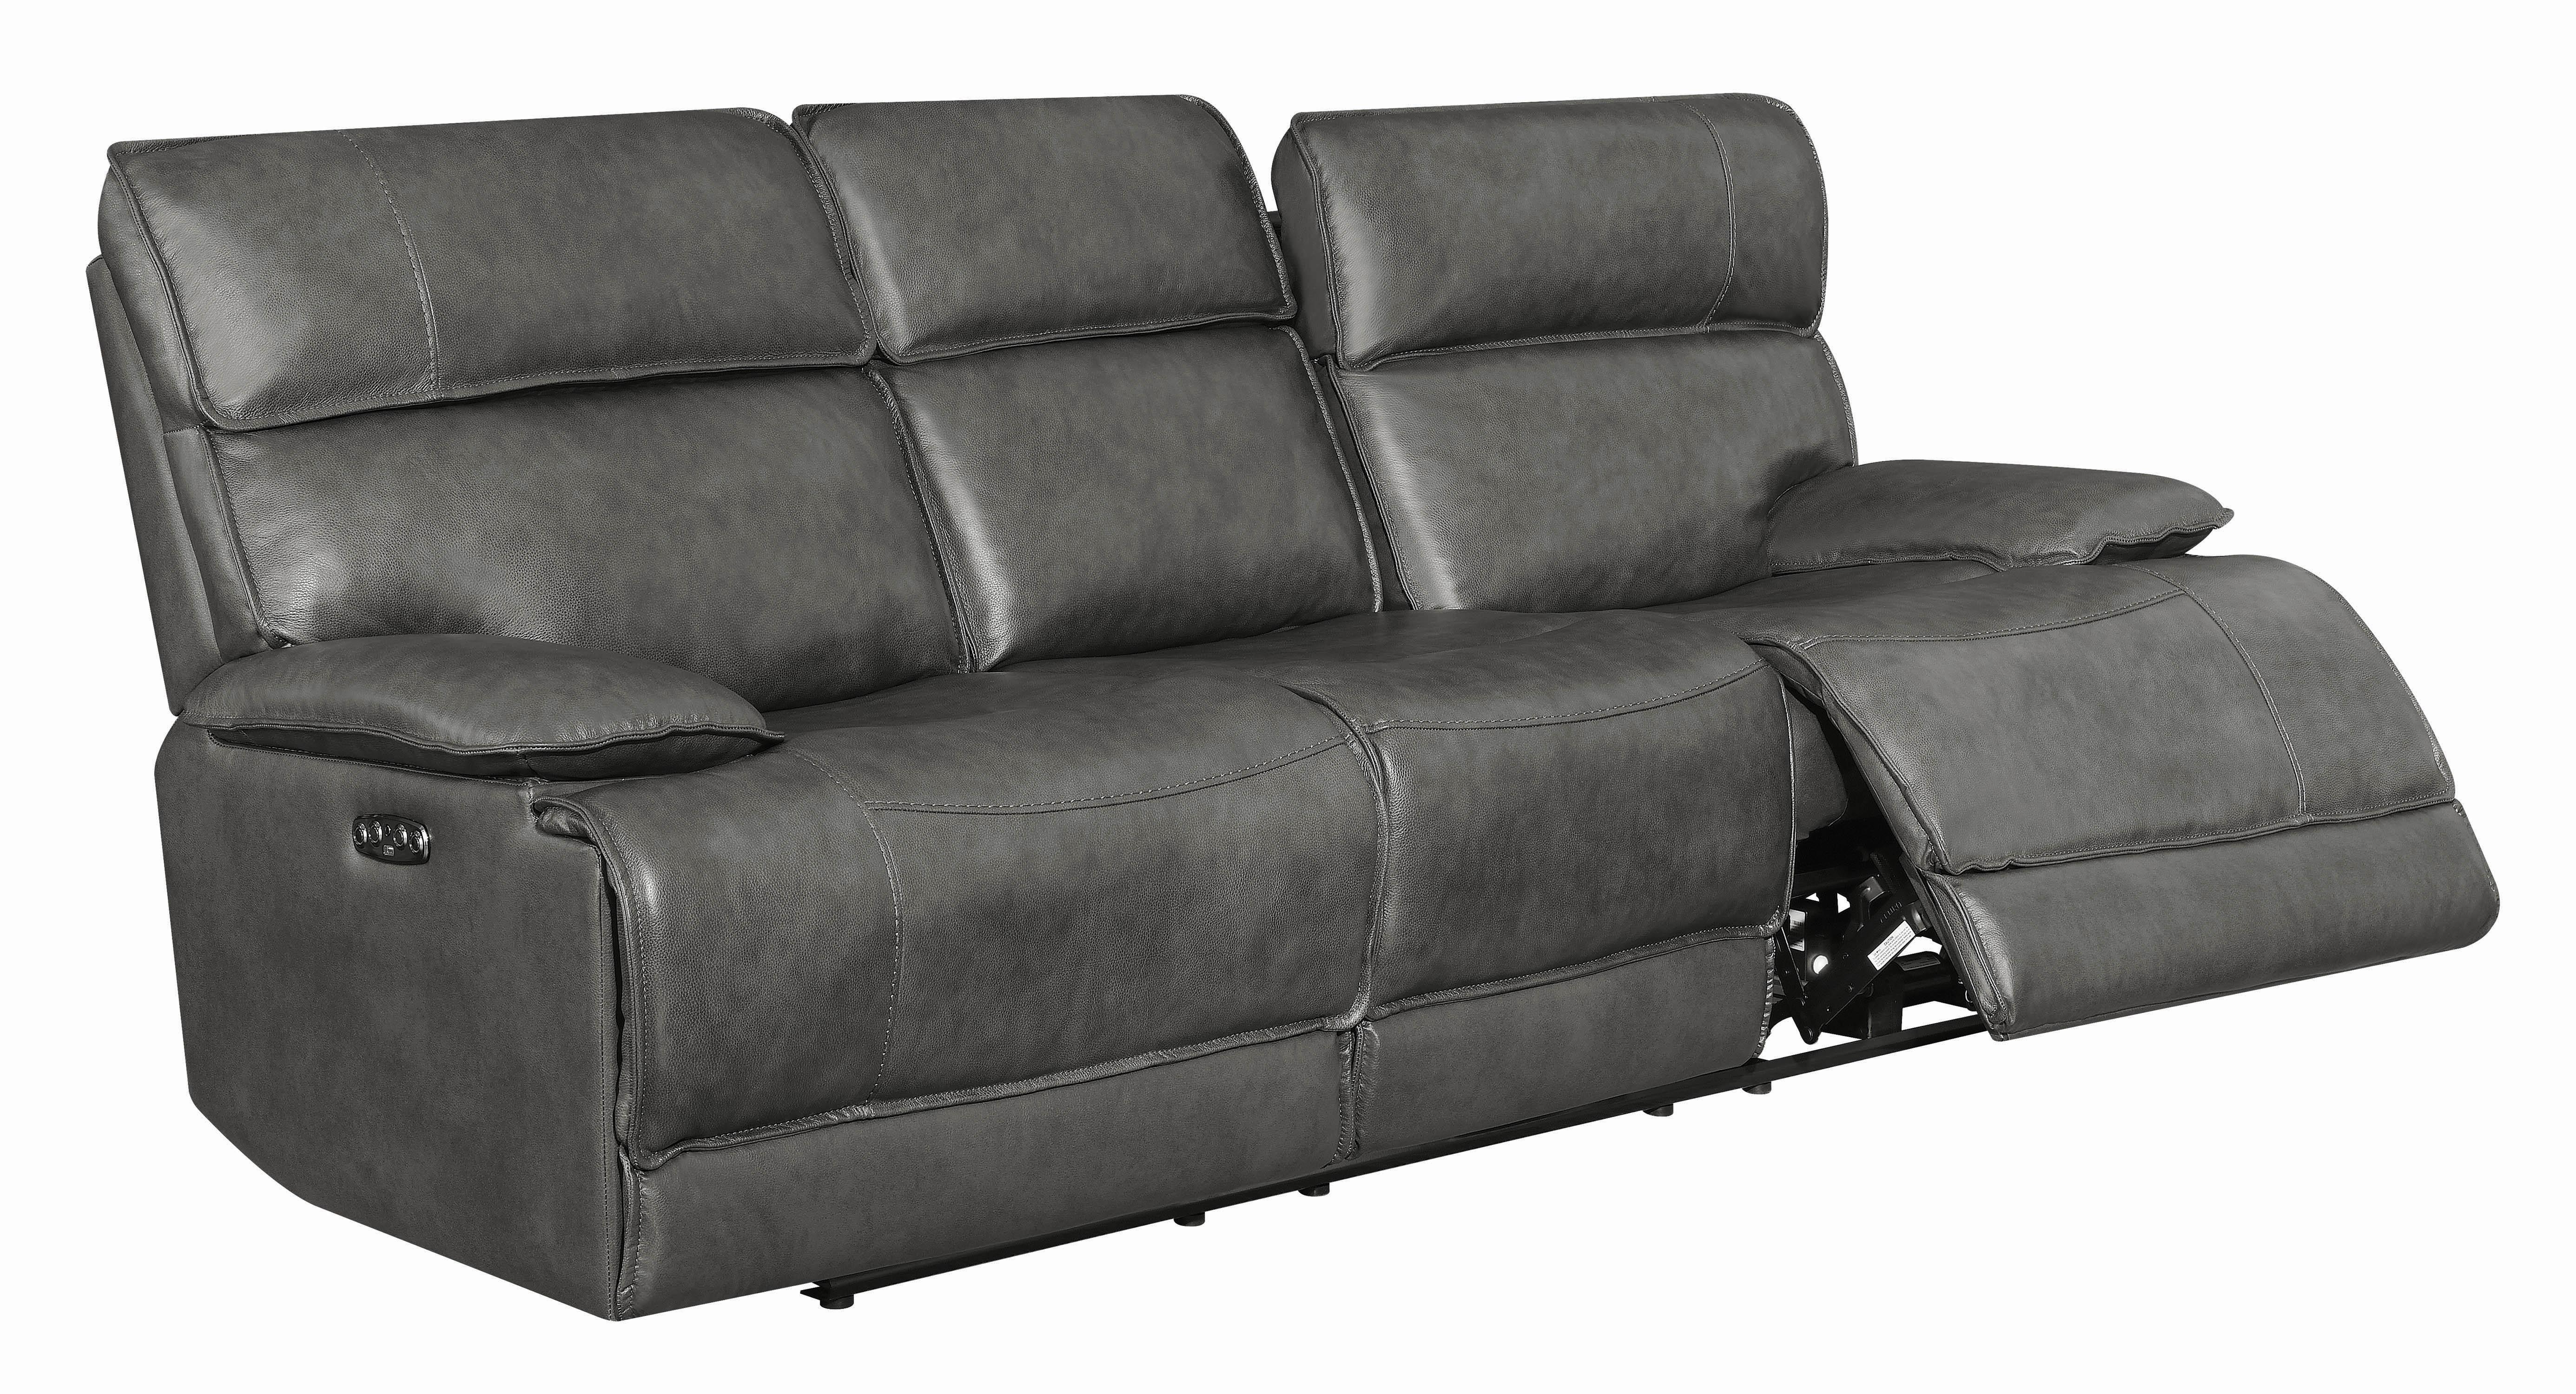 

    
650221PP Modern Gray Leather Upholstery Power2 sofa Stanford by Coaster
